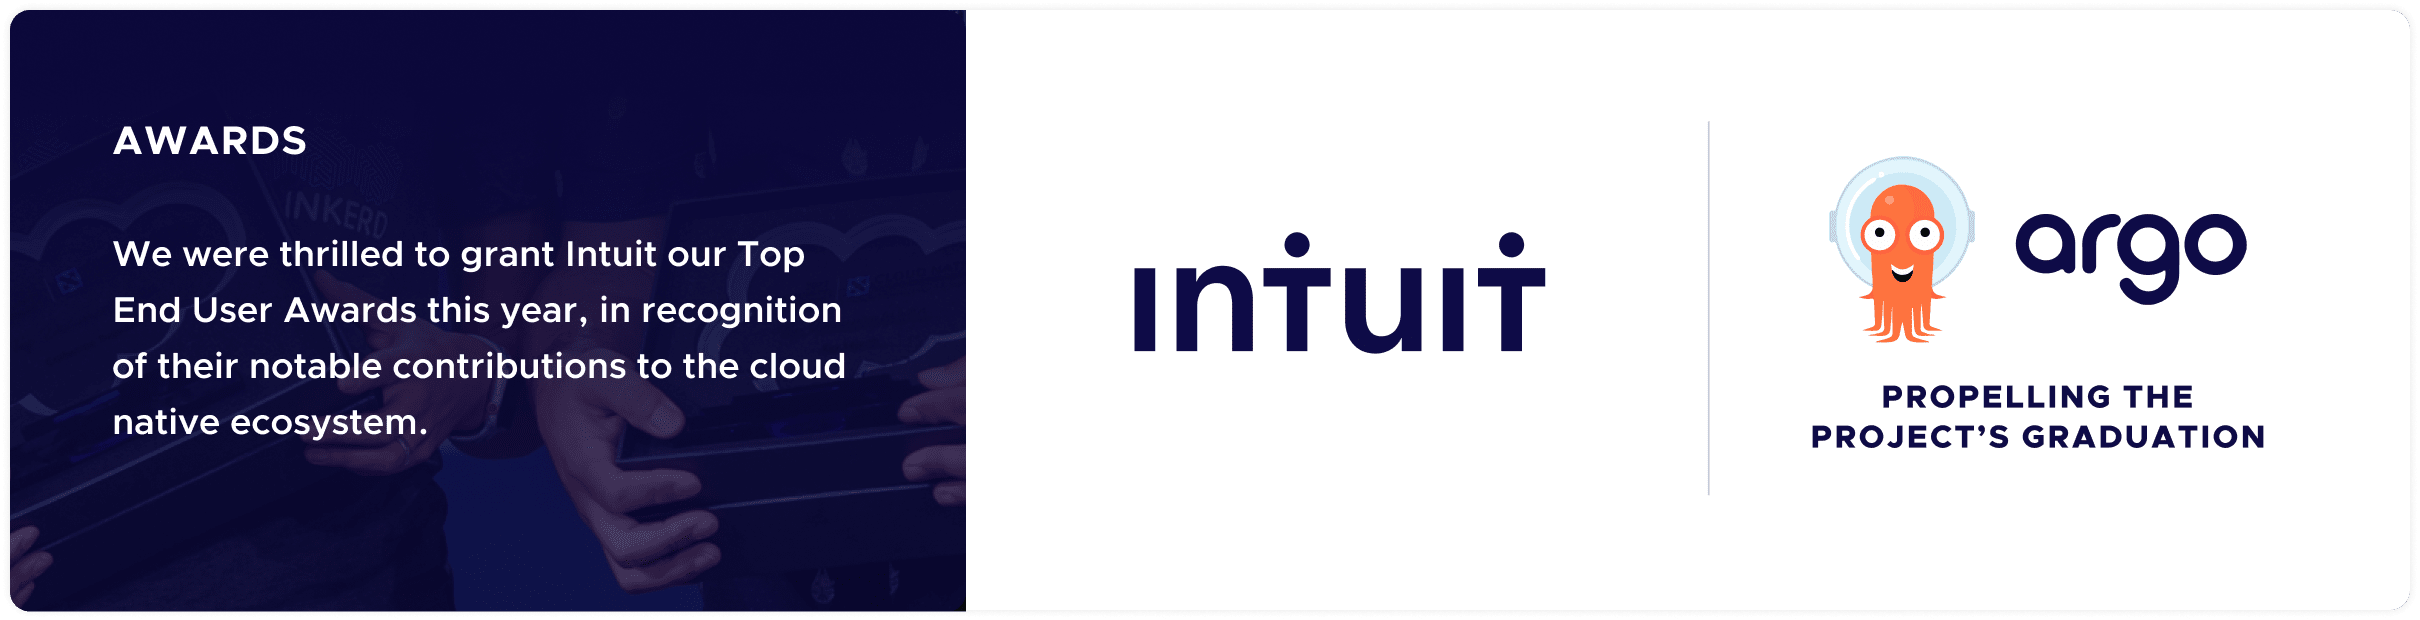 We were thrilled to grant Intuit our Top End User Award this year in recognition of their notable contributions to the cloud native ecosystem.